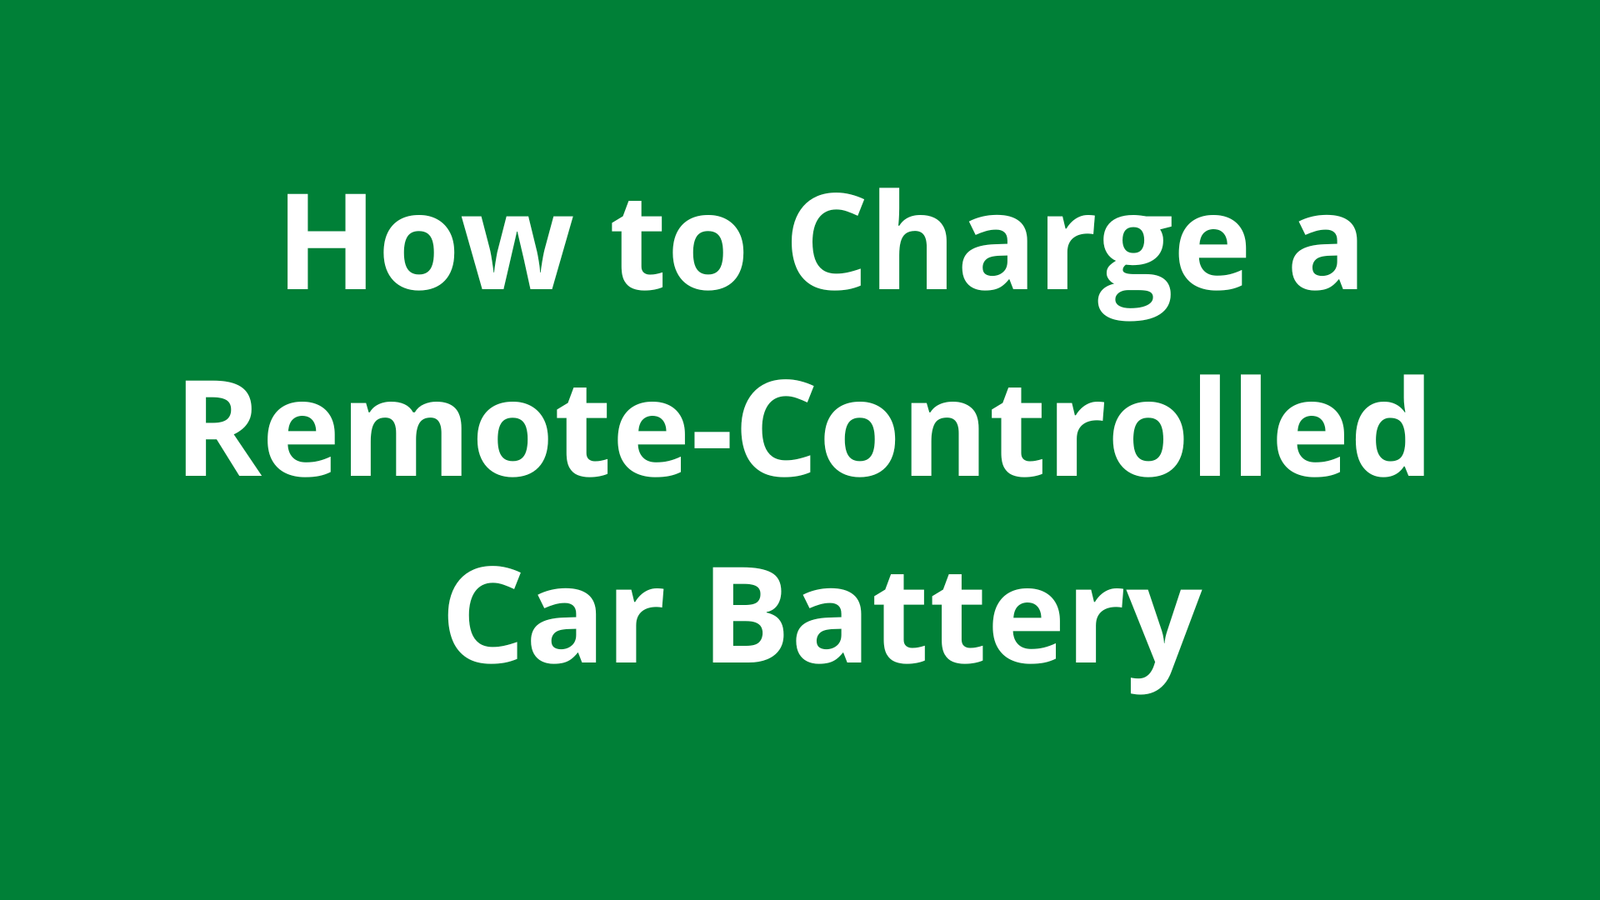 How to Charge a Remote-Controlled Car Battery